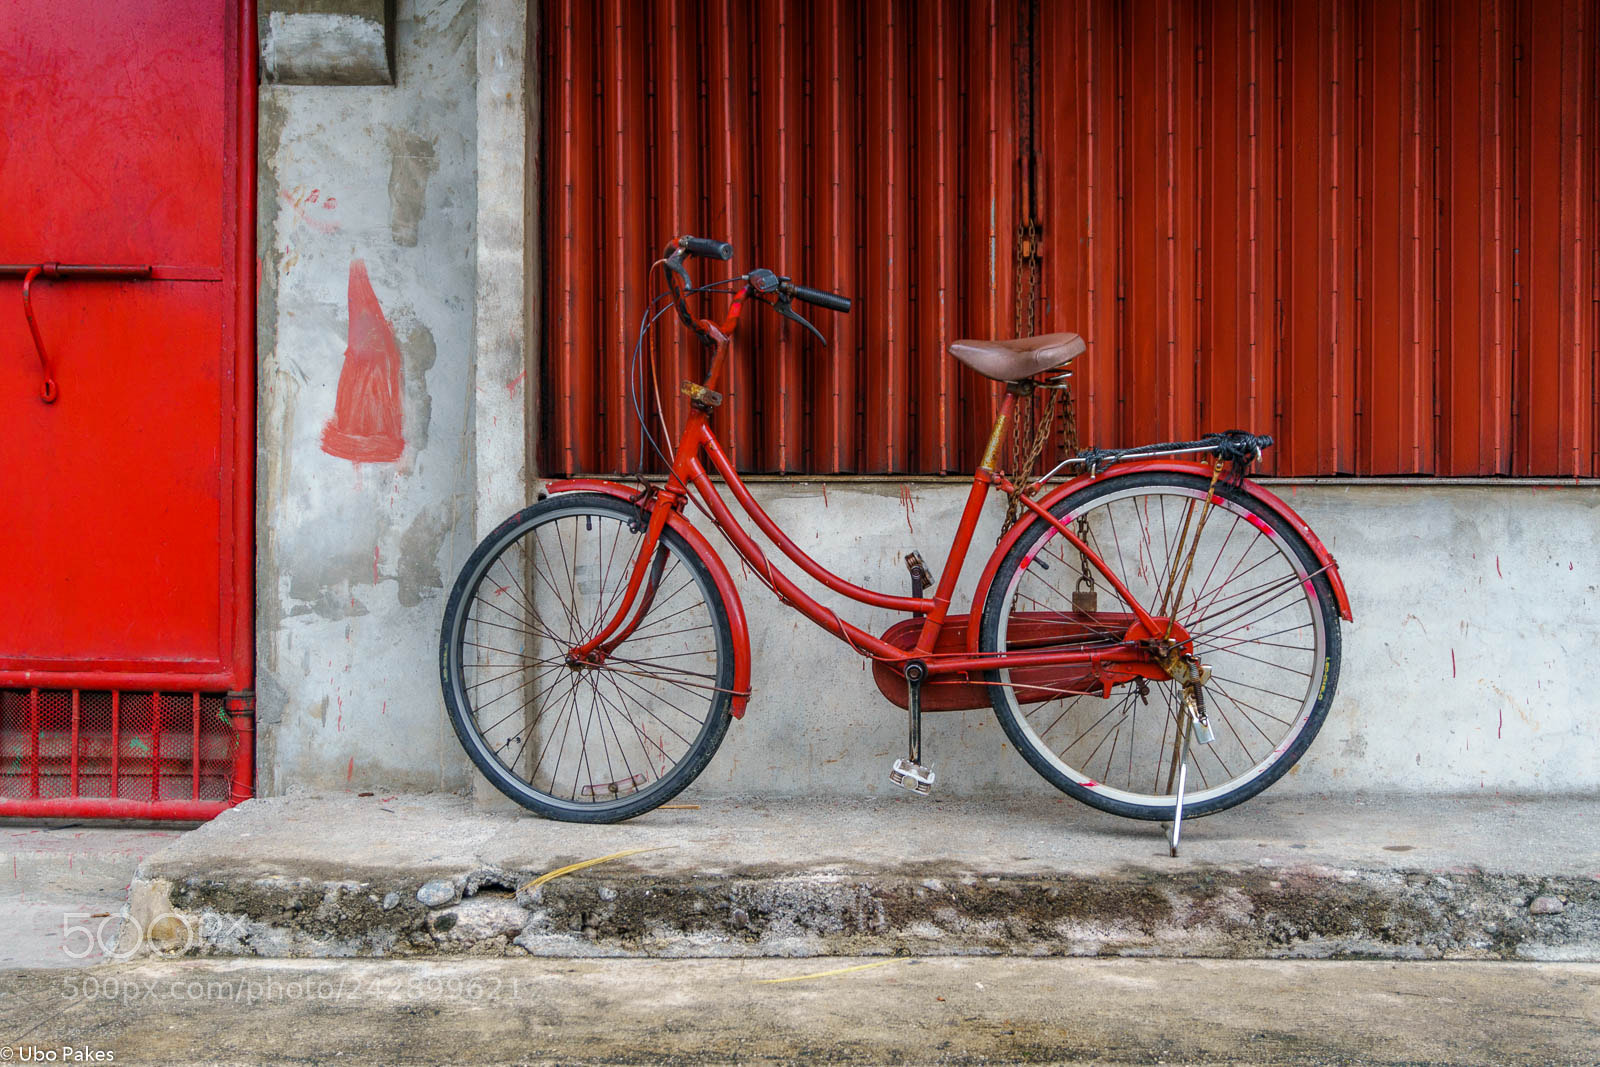 Sony a6300 sample photo. Red bike photography